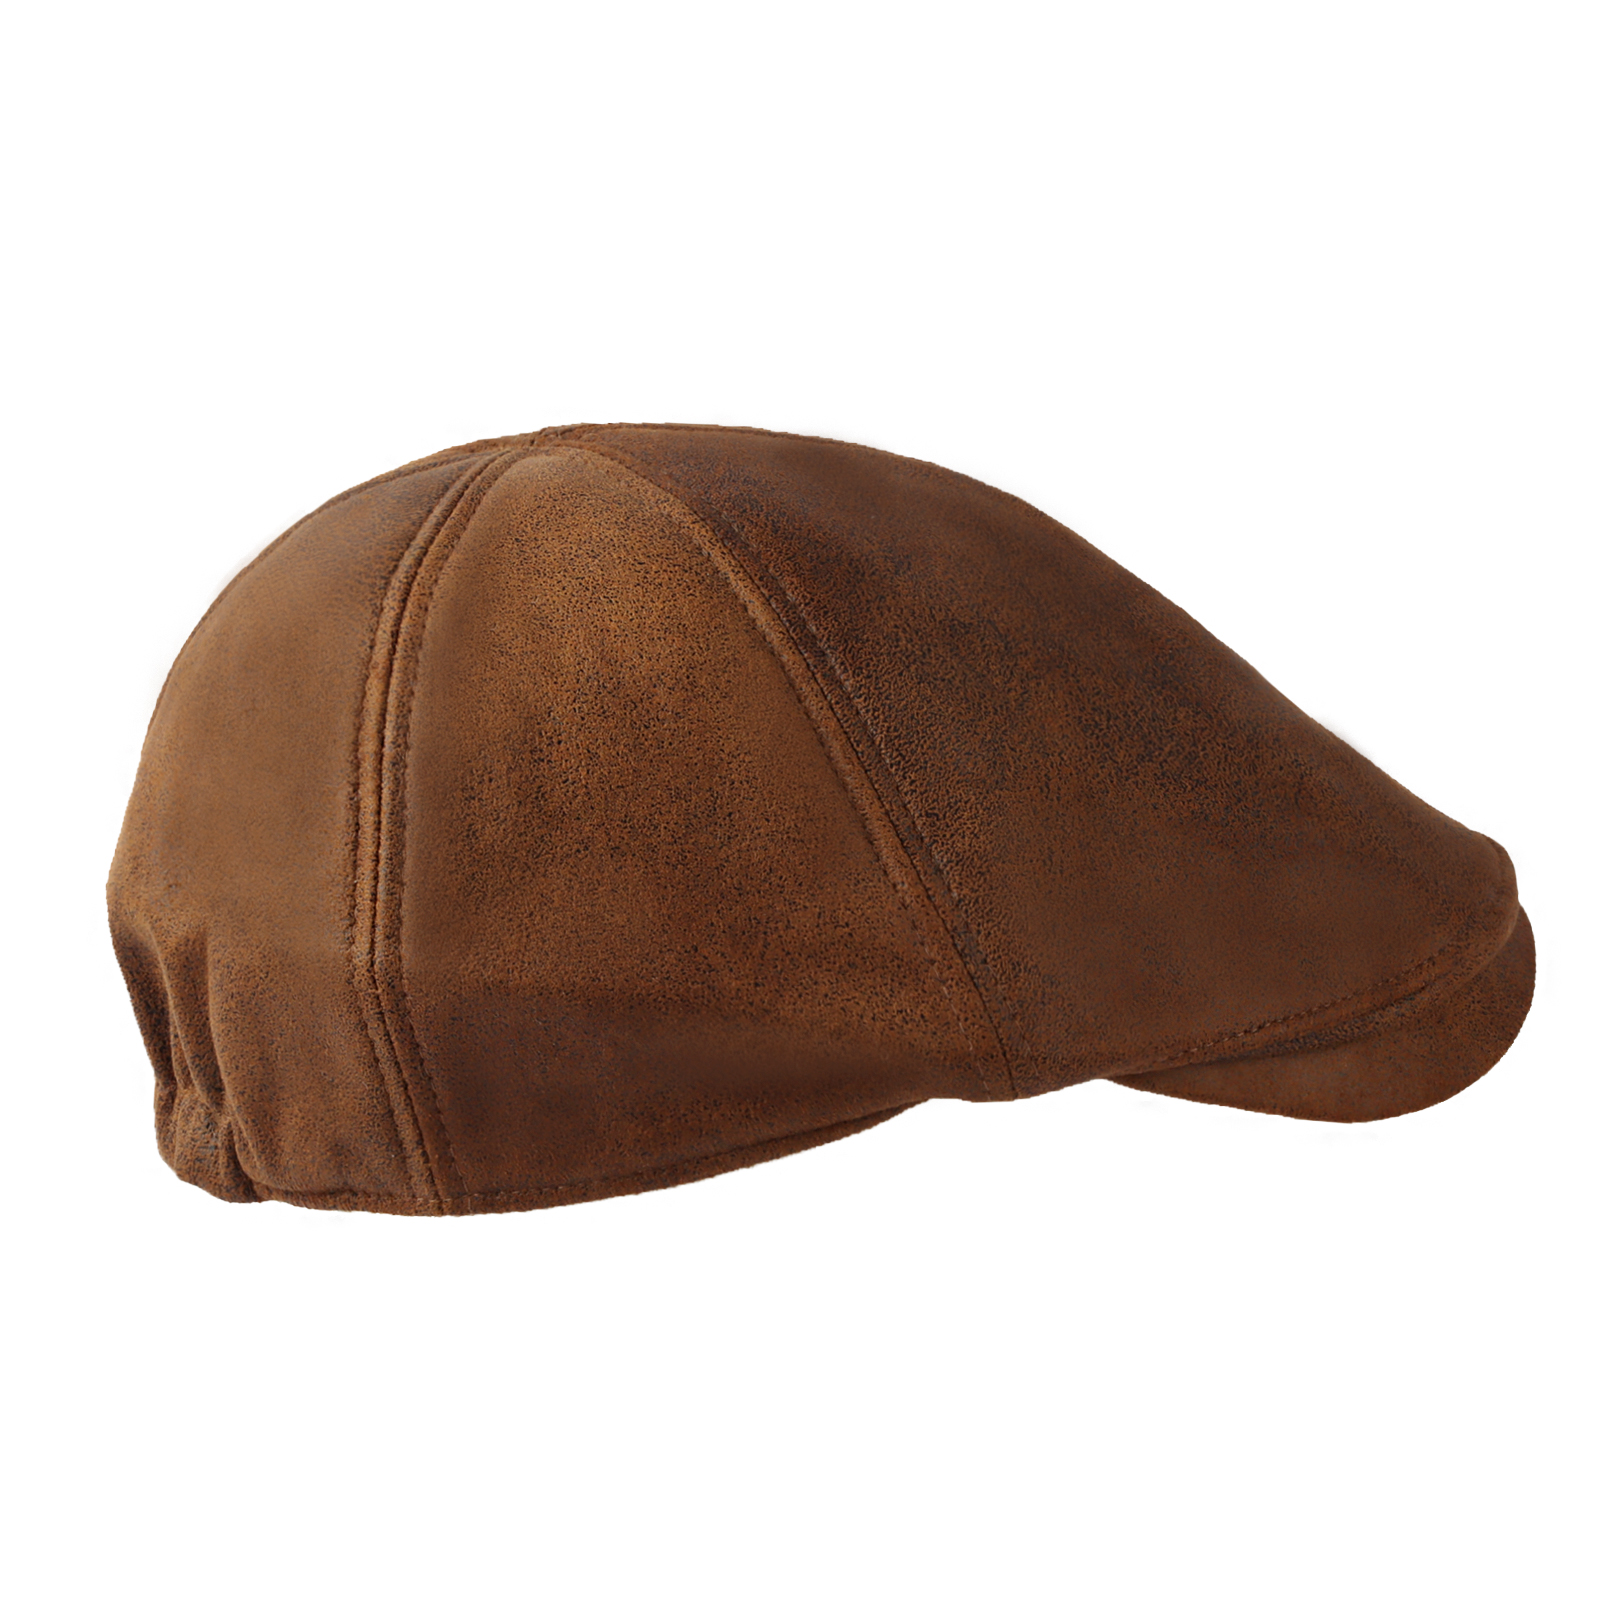 WITHMOONS Vintage Cabbie Flat Cap Classic Faux Leather Gatsby Hat ...